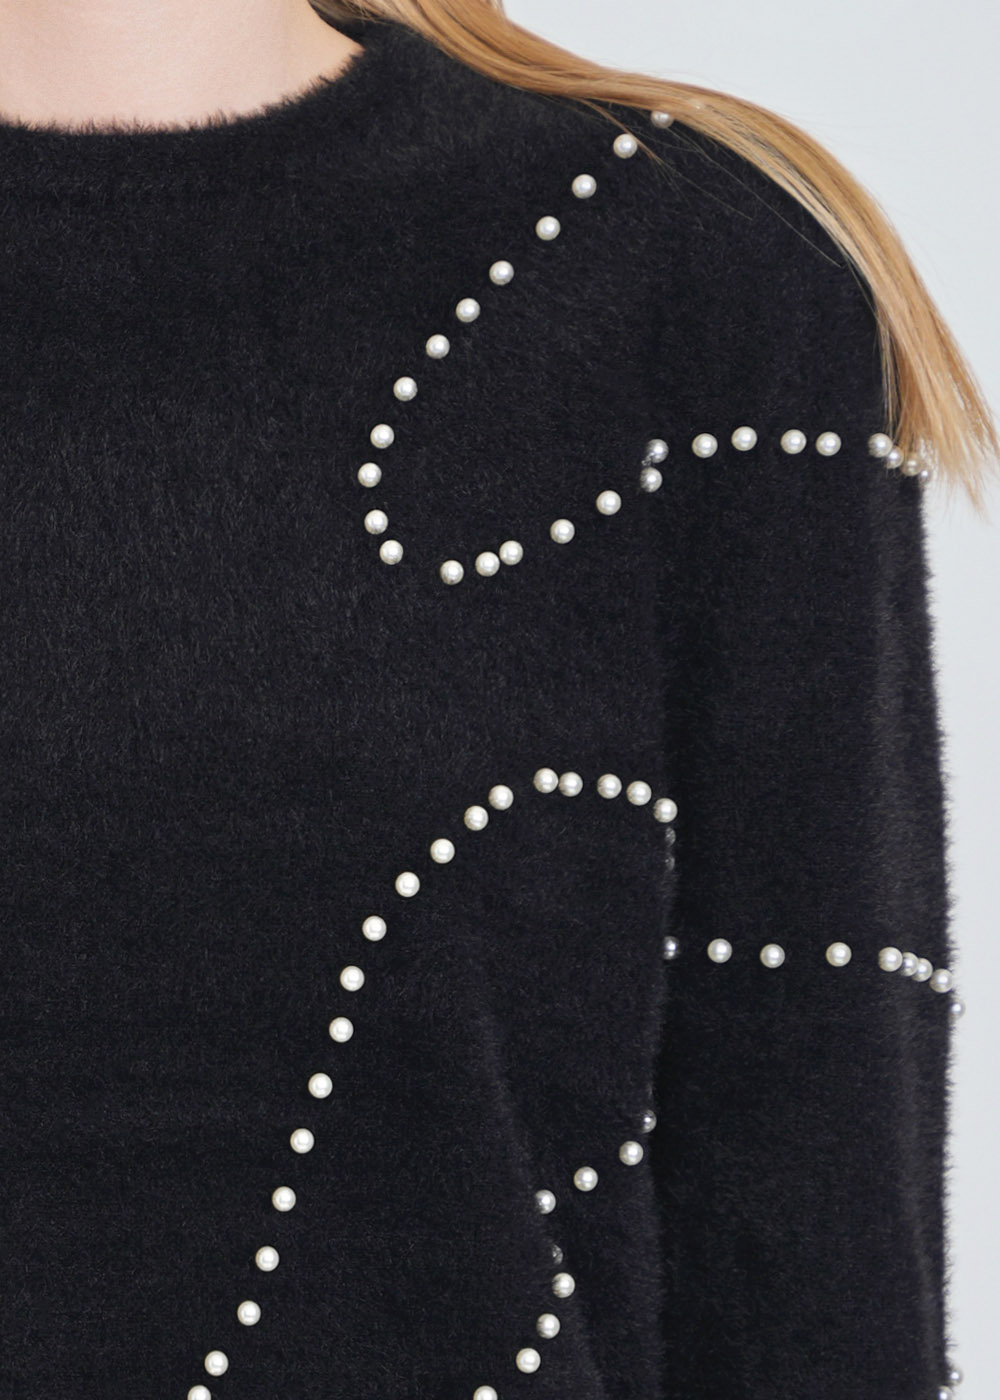 Versatile Black Top with Furry Knit and Pearls